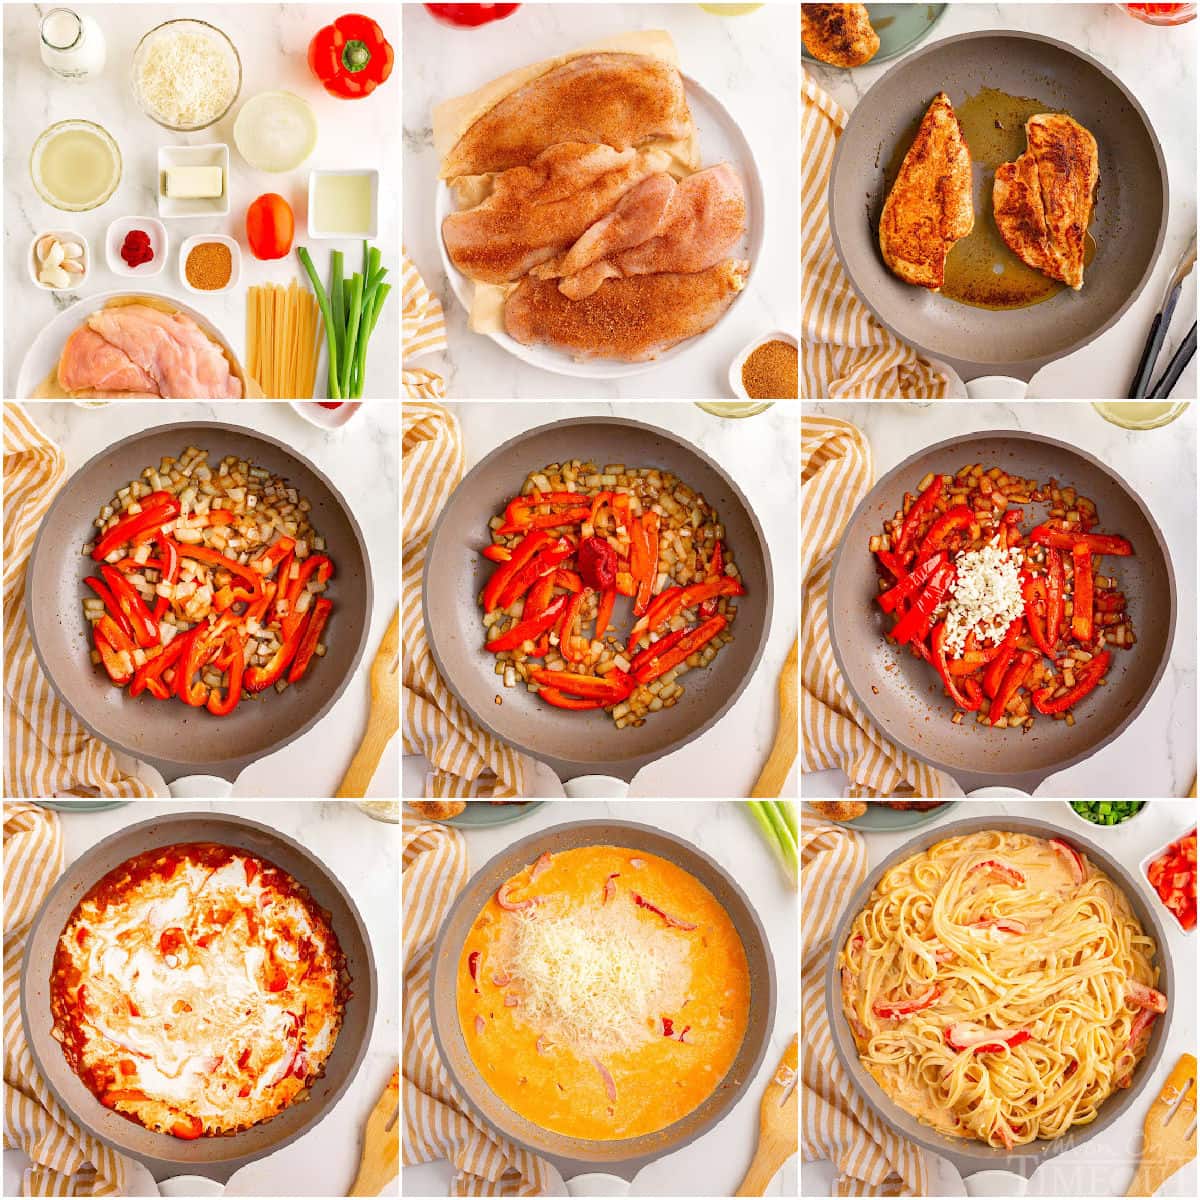 nine image collage showing how to make cajun chicken pasta step by step.